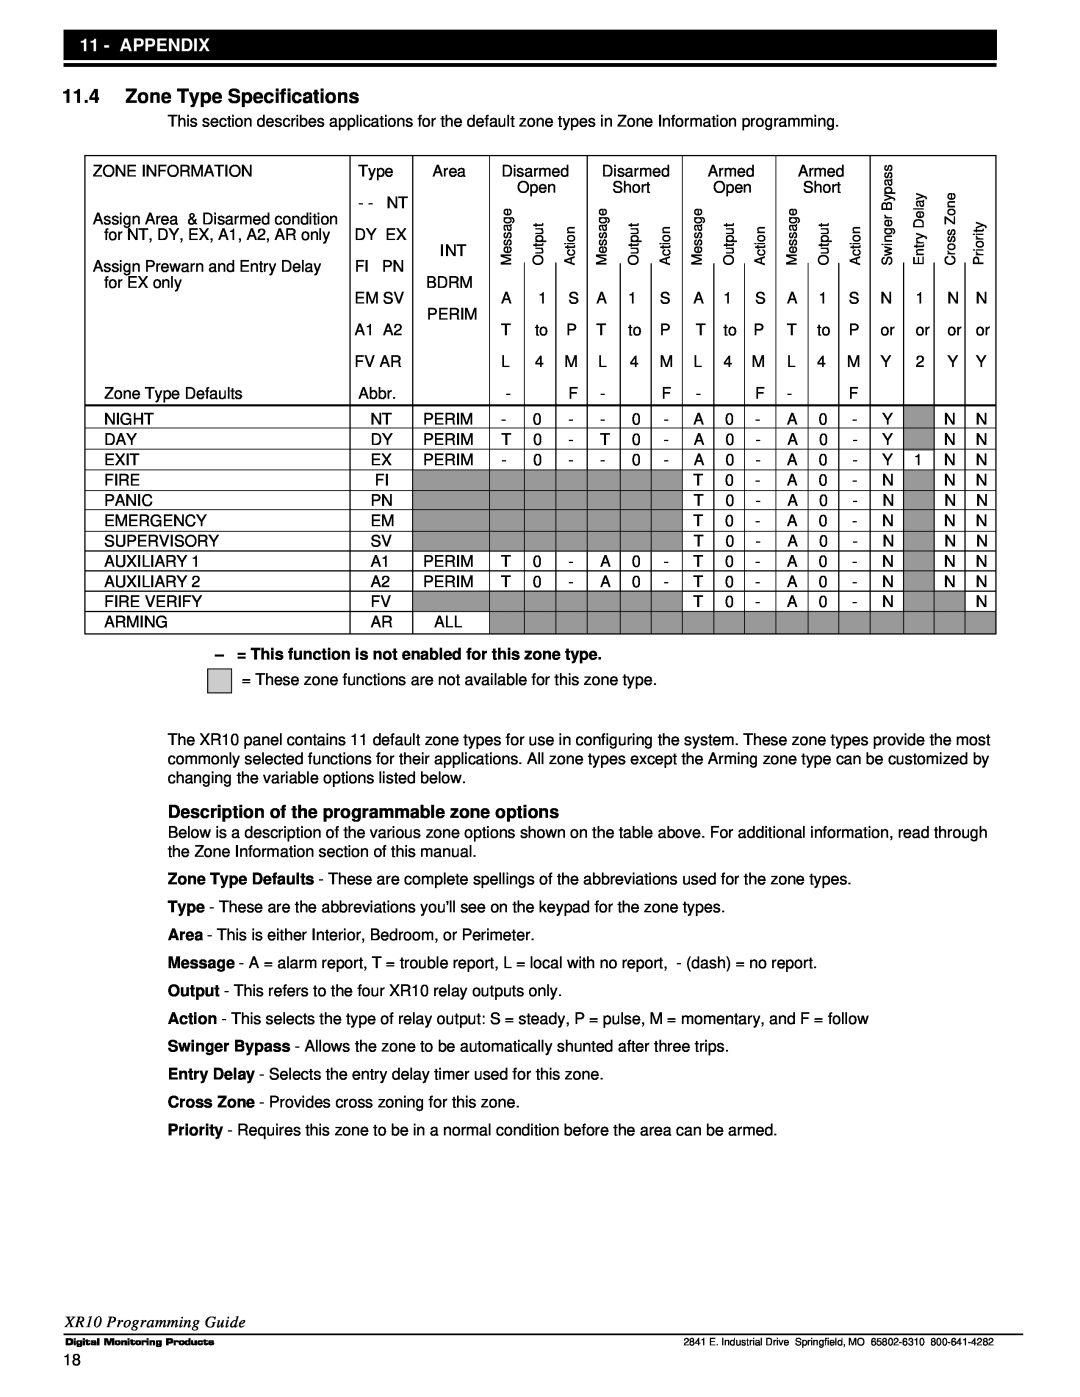 DMP Electronics XR10 manual 11.4Zone Type Specifications, Appendix, Description of the programmable zone options 